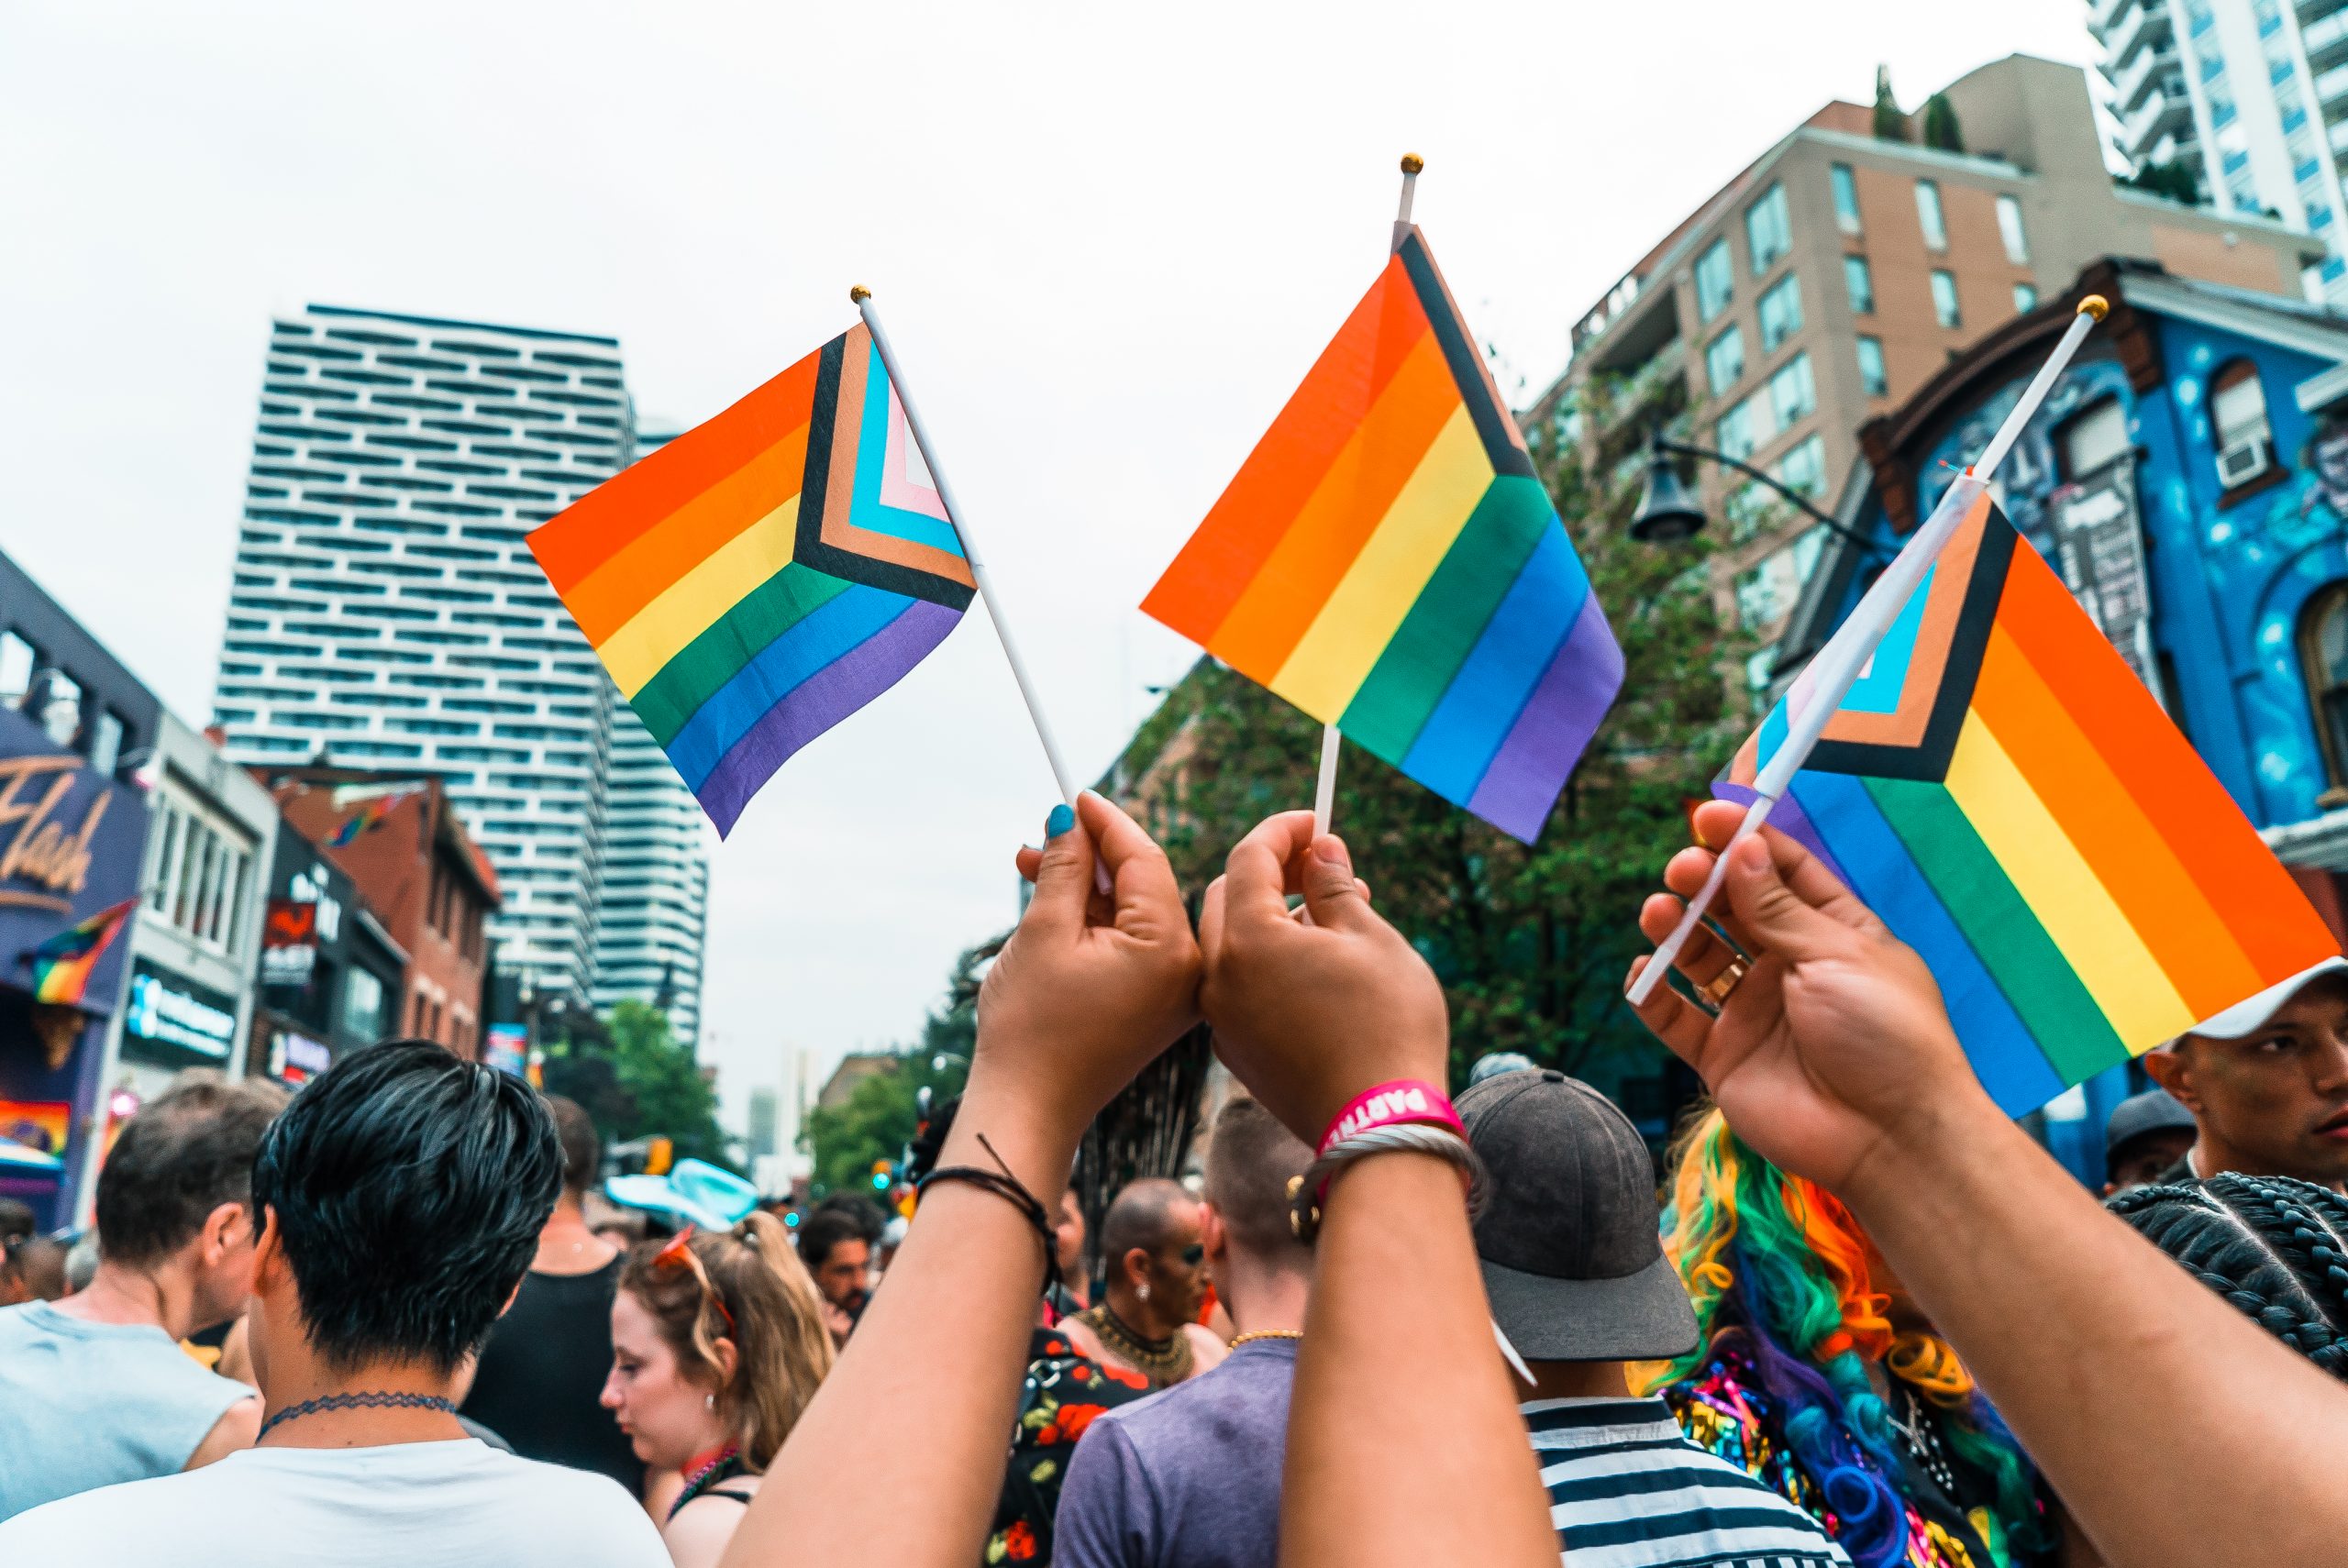 How to watch the Toronto Pride?